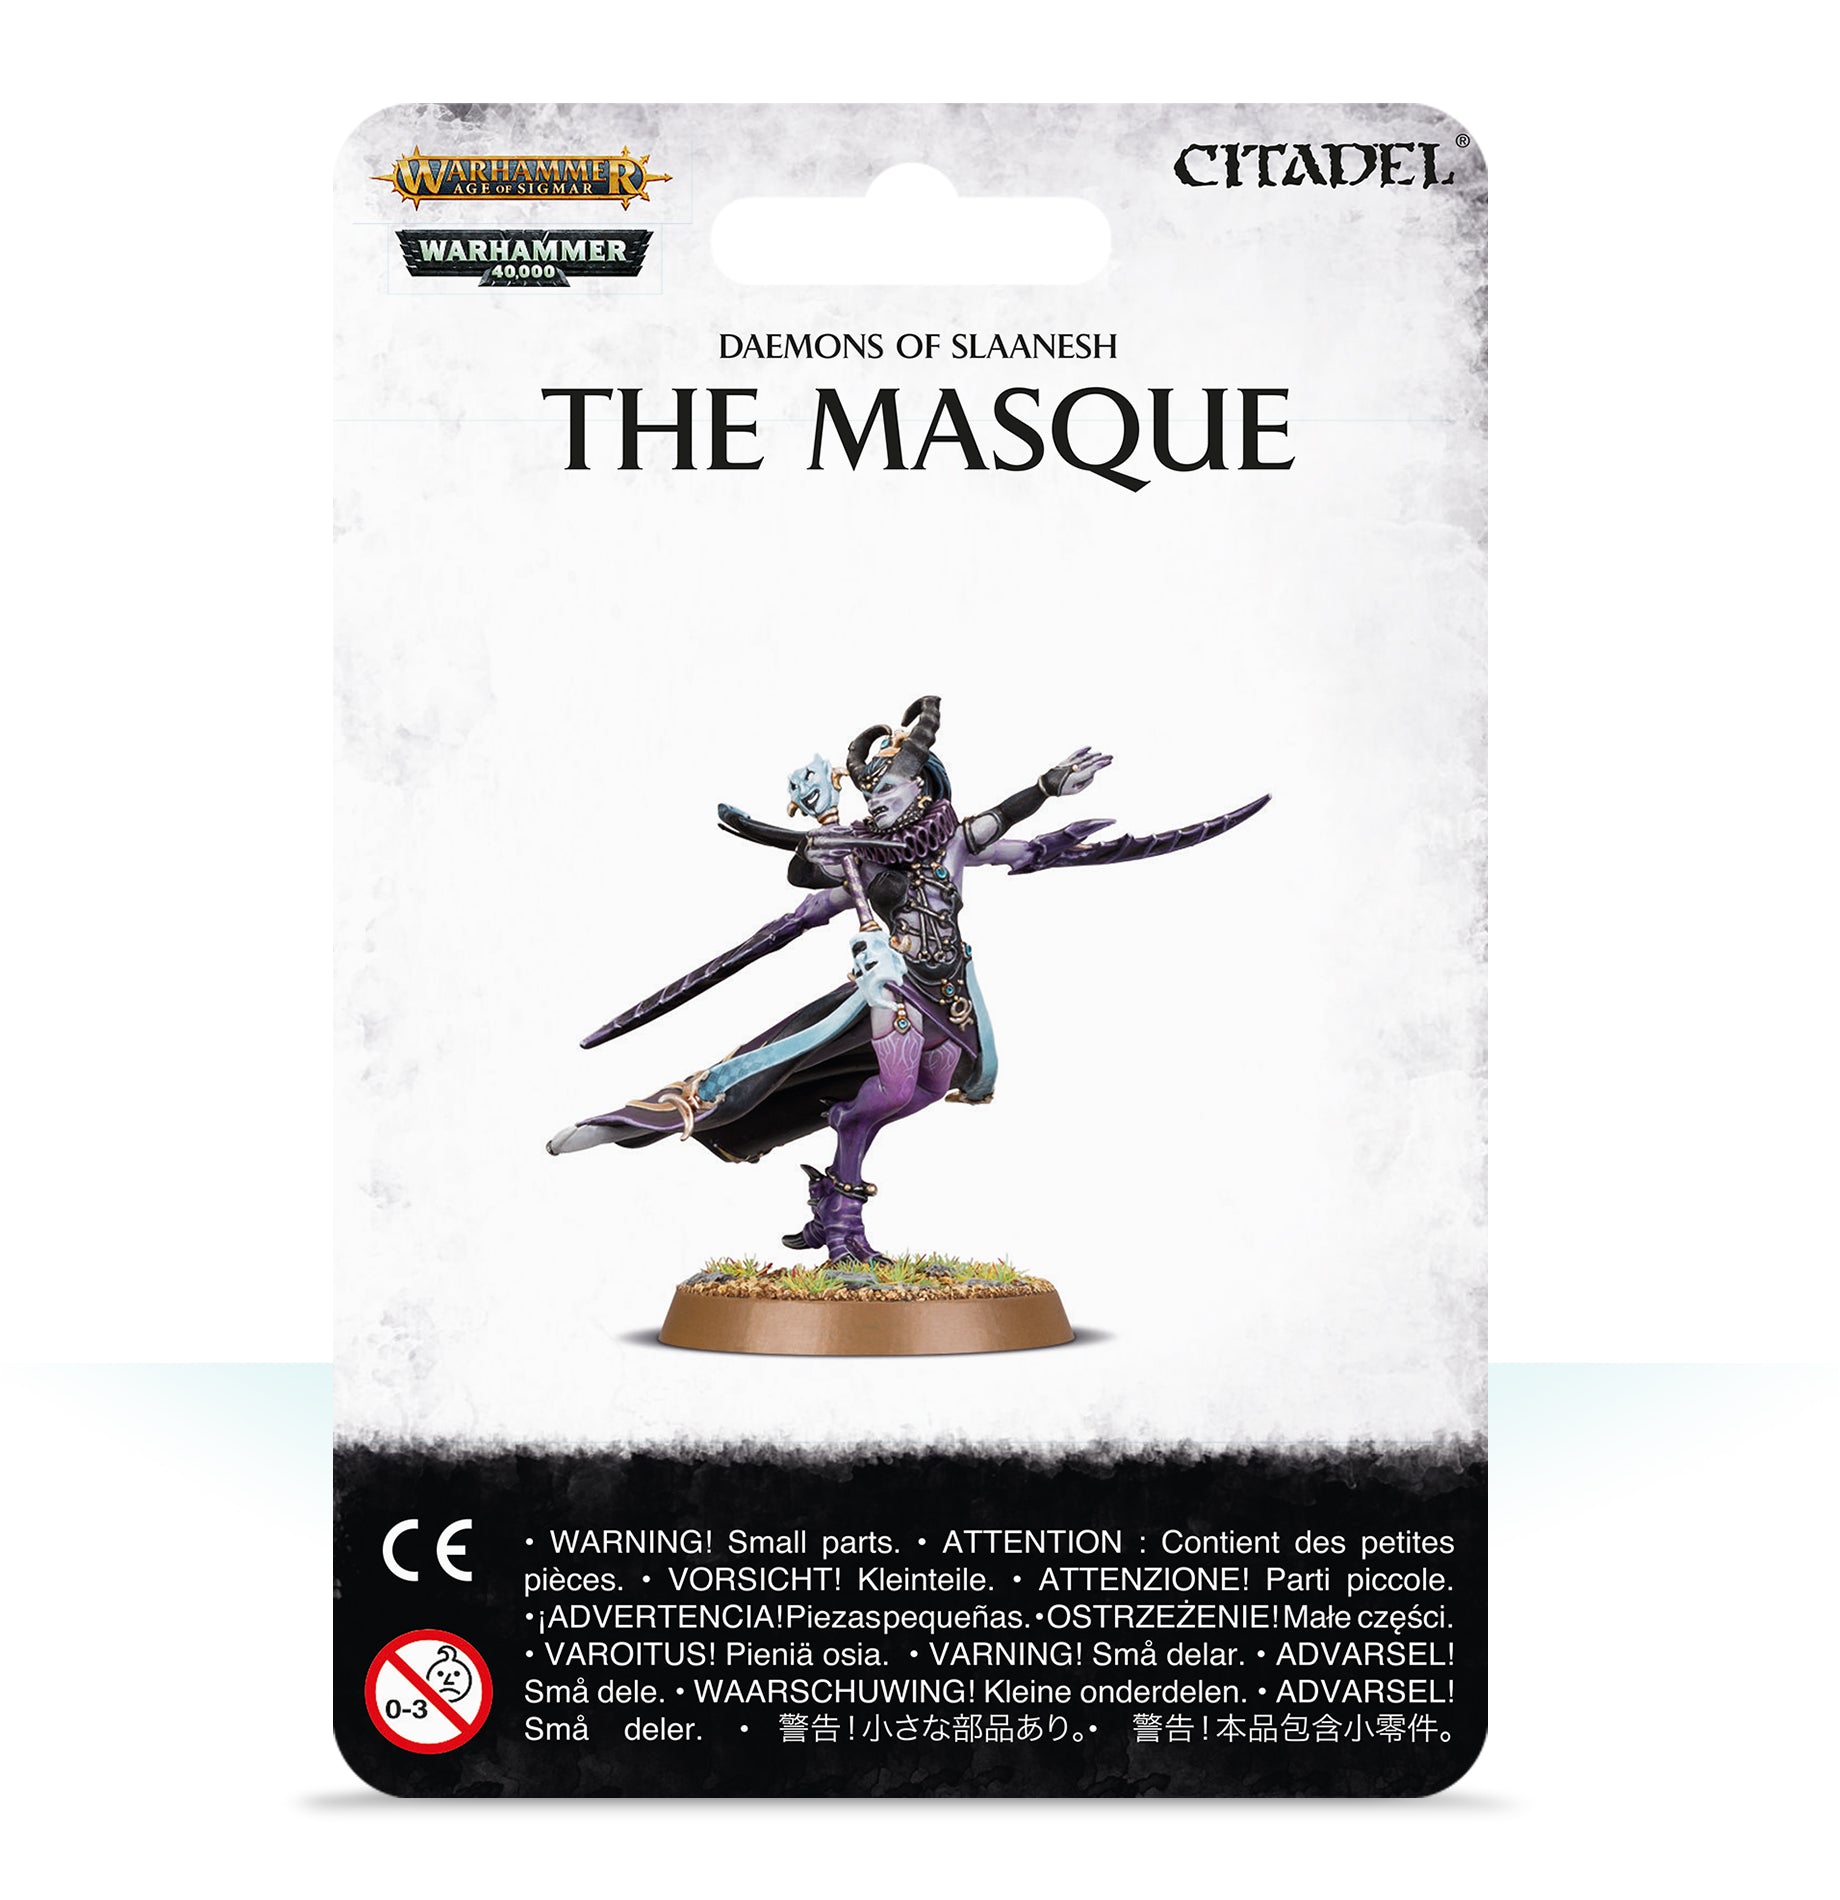 Warhammer Age of Sigmar: Daemons of Slaanesh - The Masque | All About Games